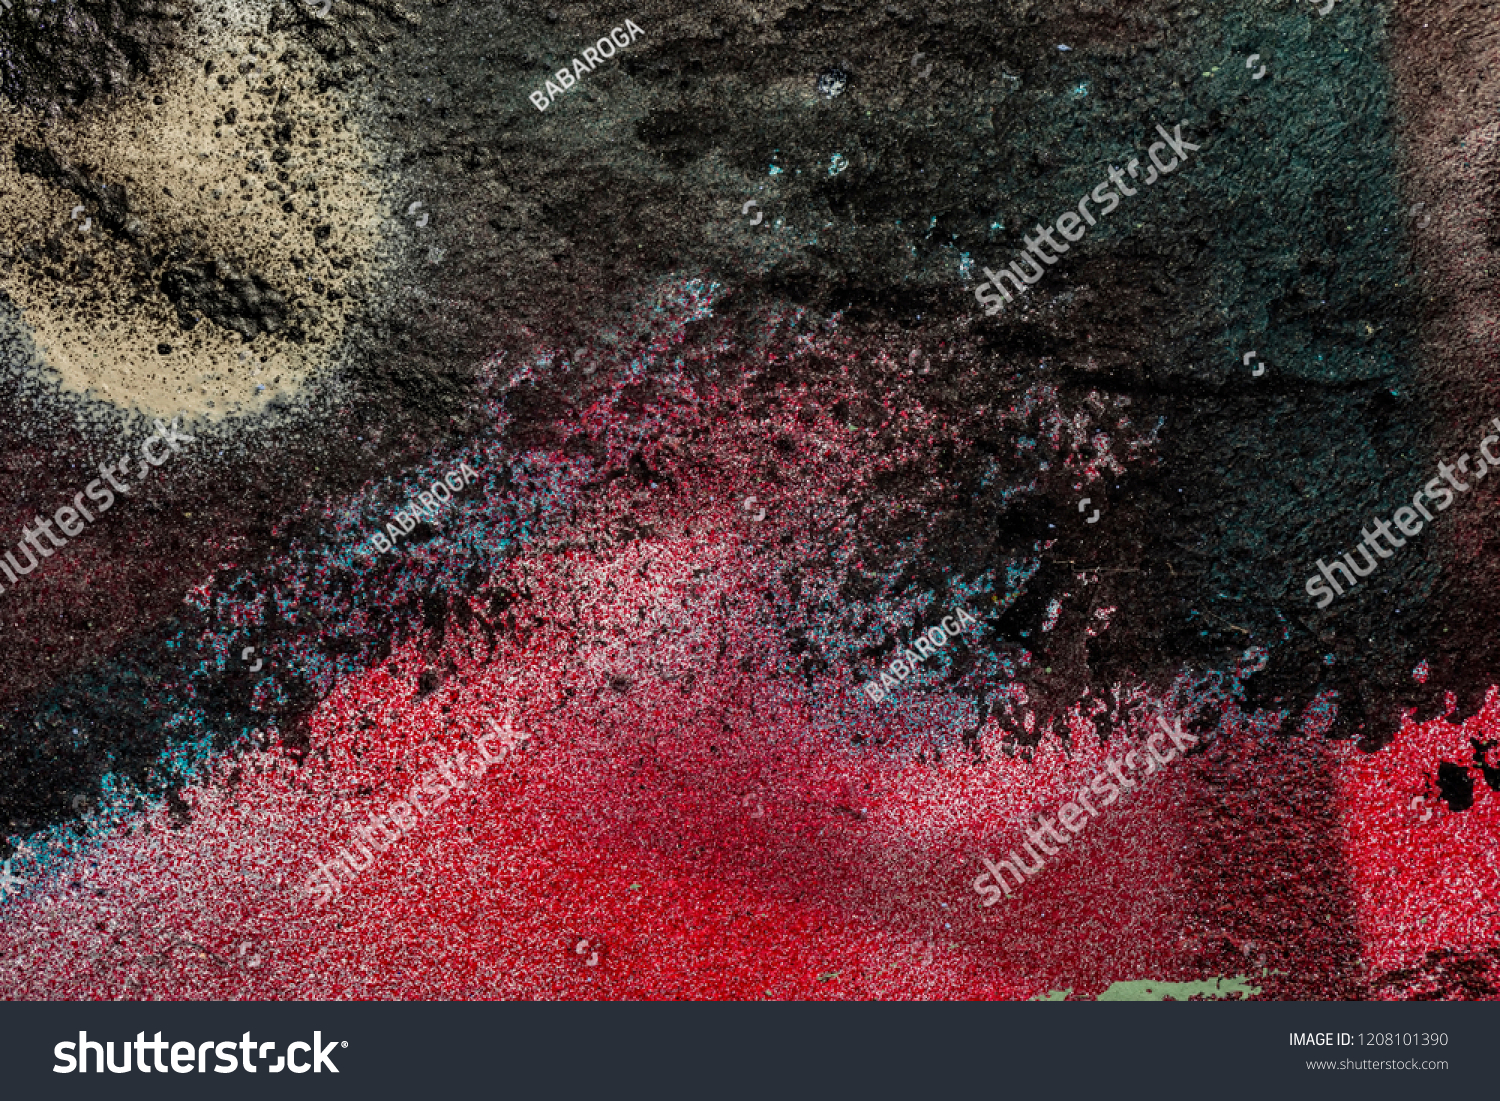 Grunge background with abstract colored texture. Old scratches, stain, paint splats, spots. #1208101390